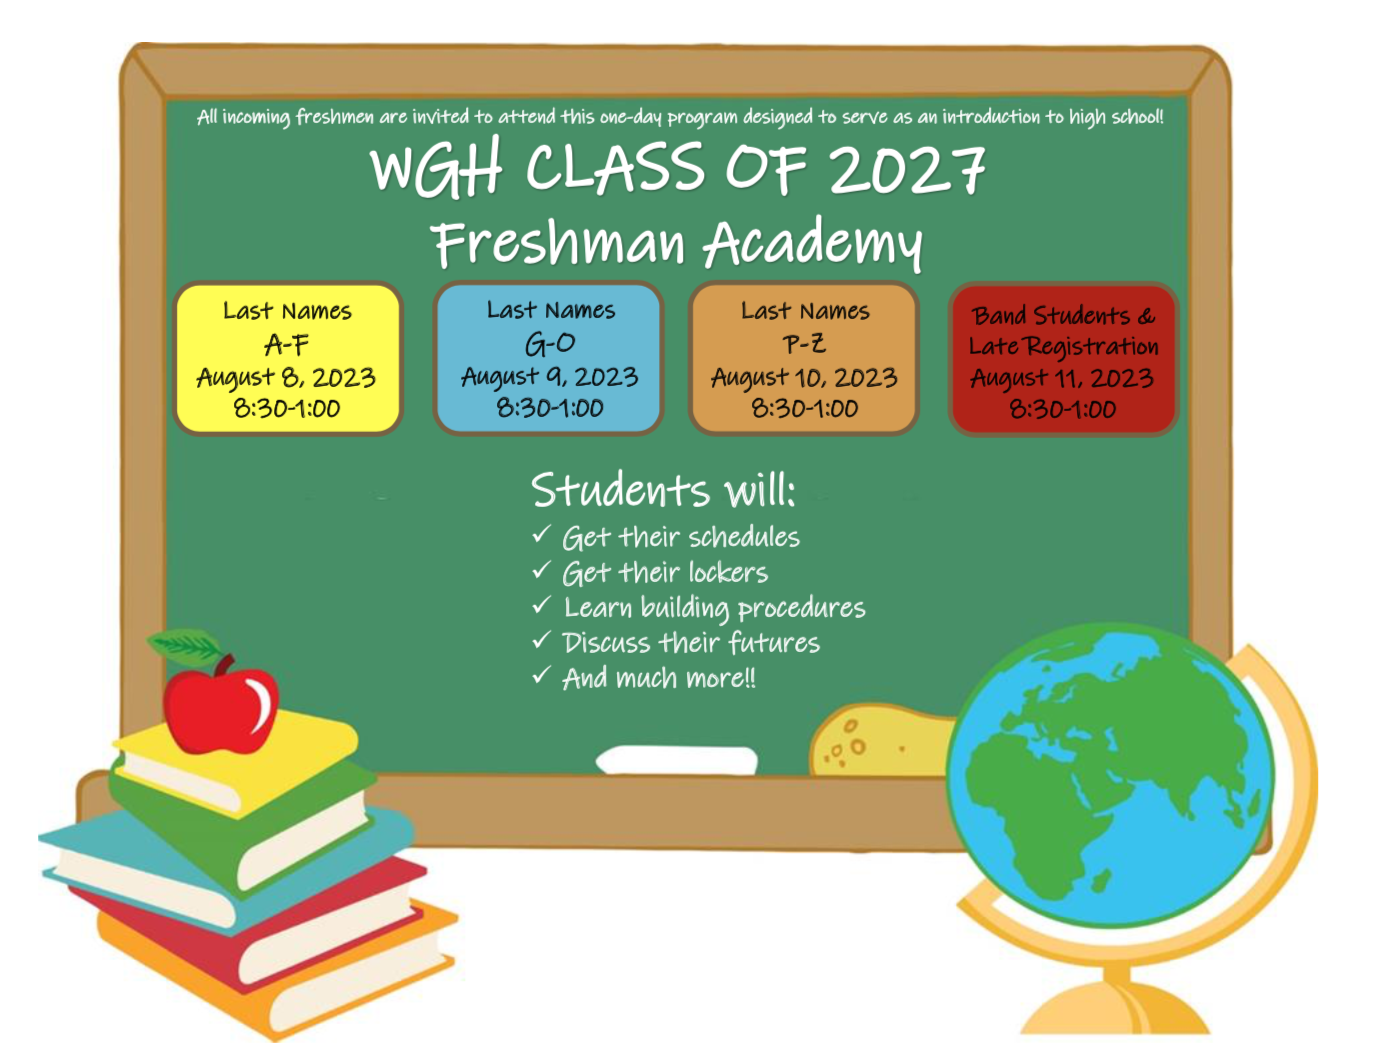 Freshman Academy for the class of 2027!